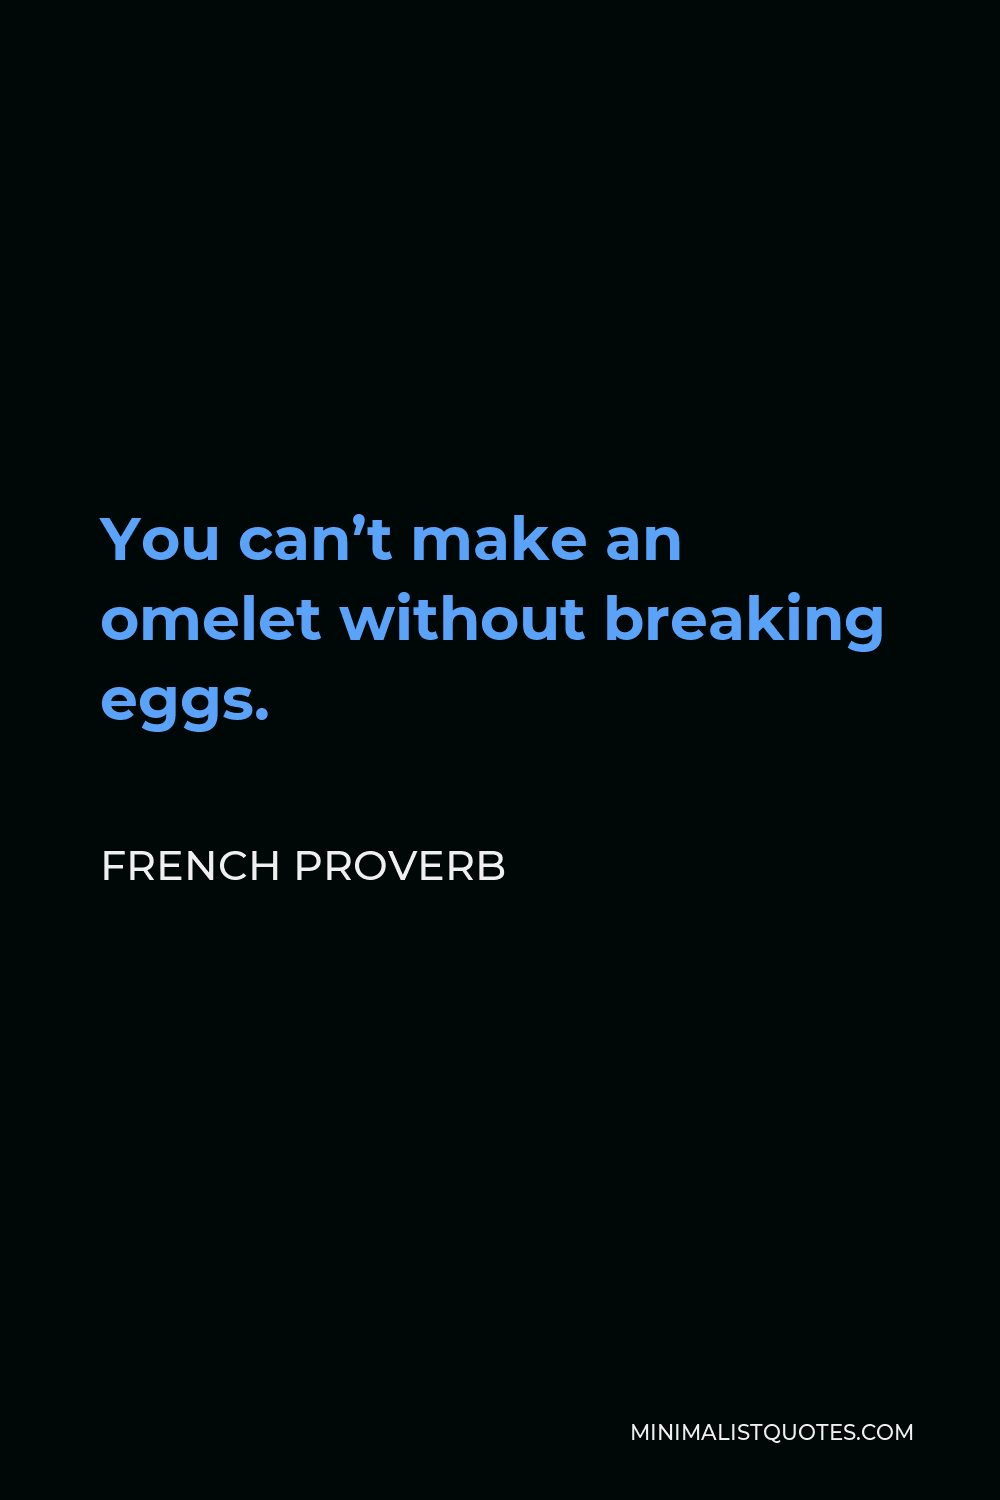 French Proverb Quote - You can’t make an omelet without breaking eggs.